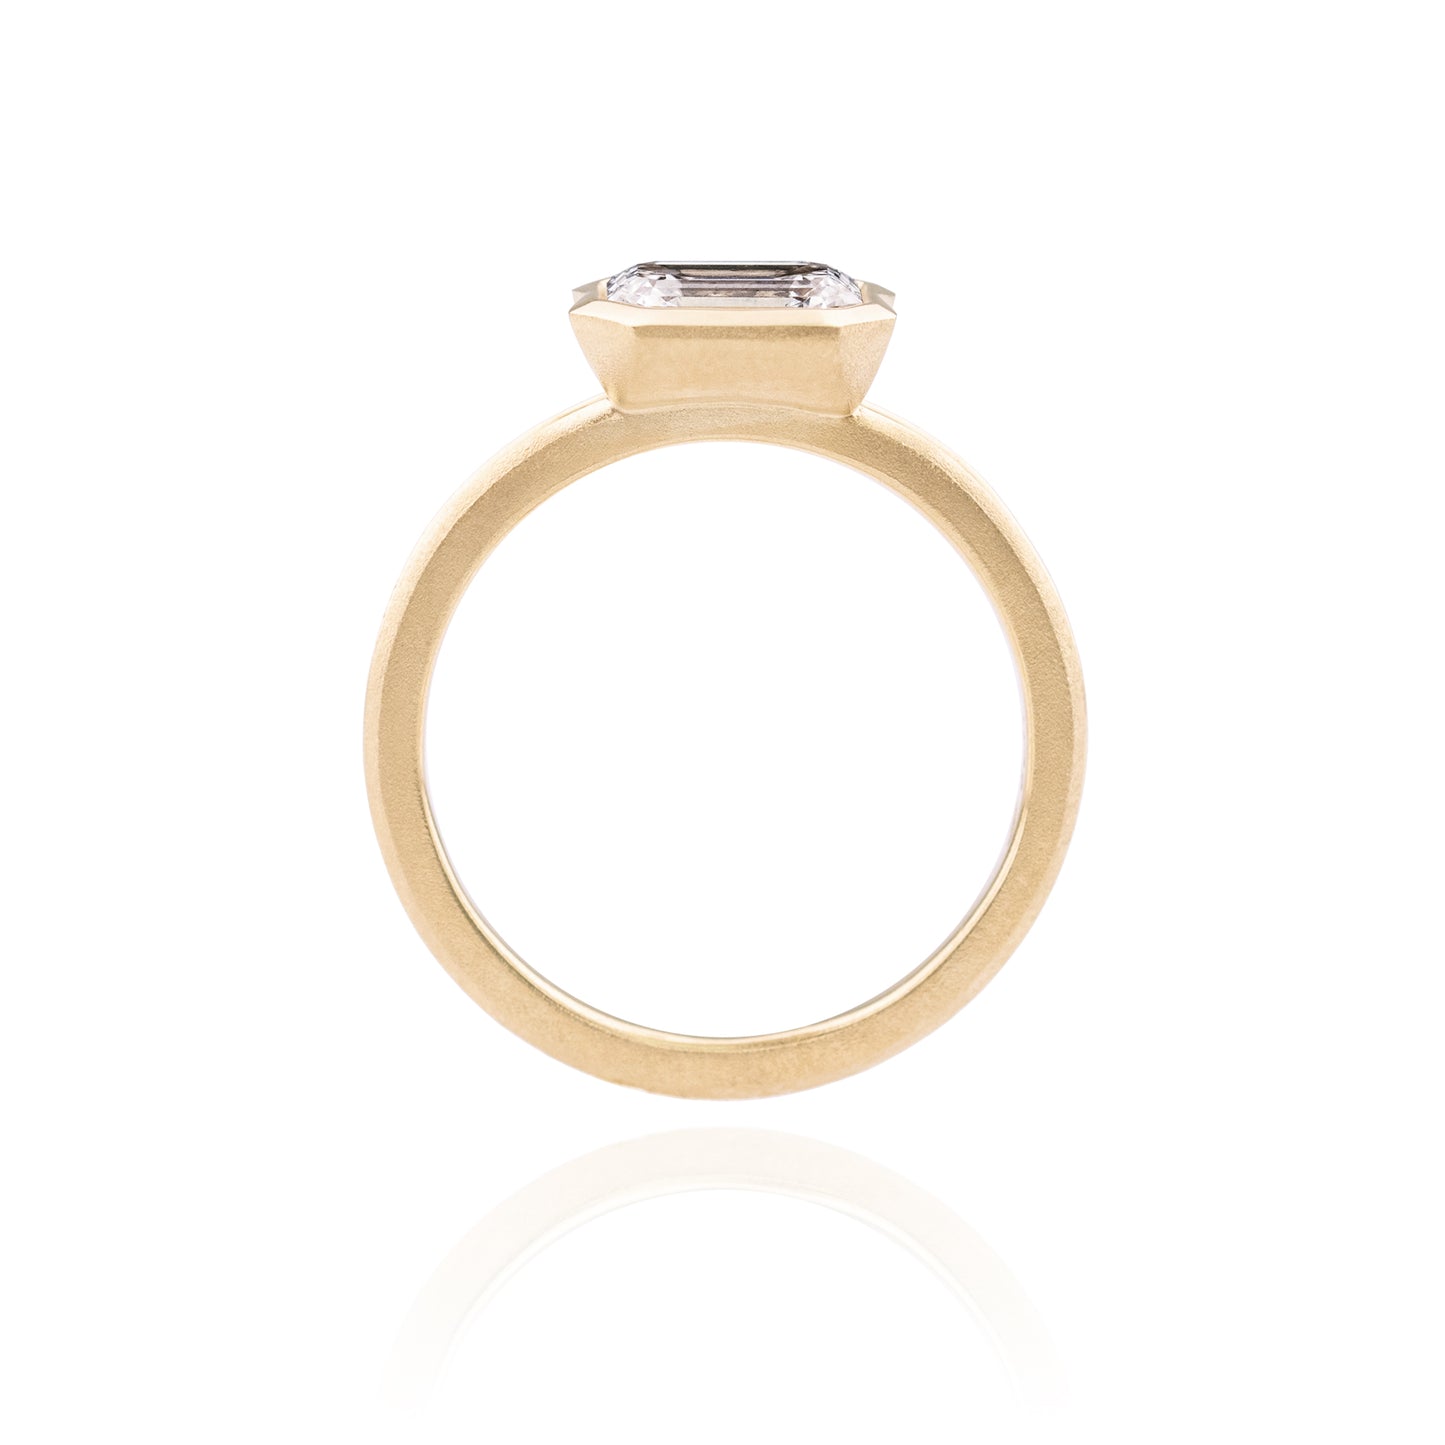 Orme-Brown Contemporary Fine Jewellery Double Dune Engagement Ring Emerald Cut Diamond 18ct Gold Recycled Fairmined Ethical Sustainable